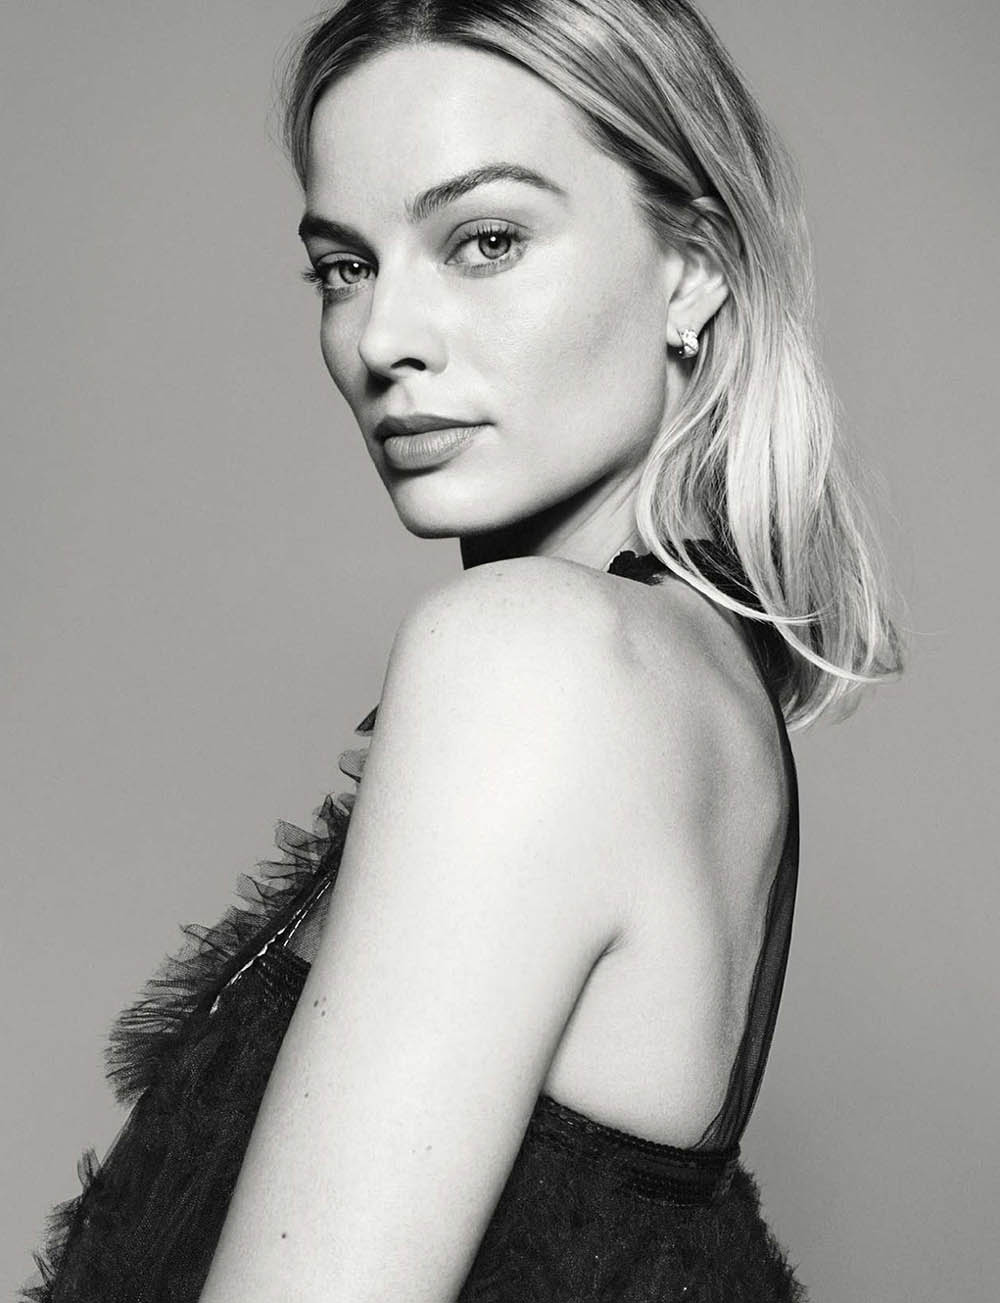 Margot Robbie covers Elle France February 15th, 2019 by Liz Collins